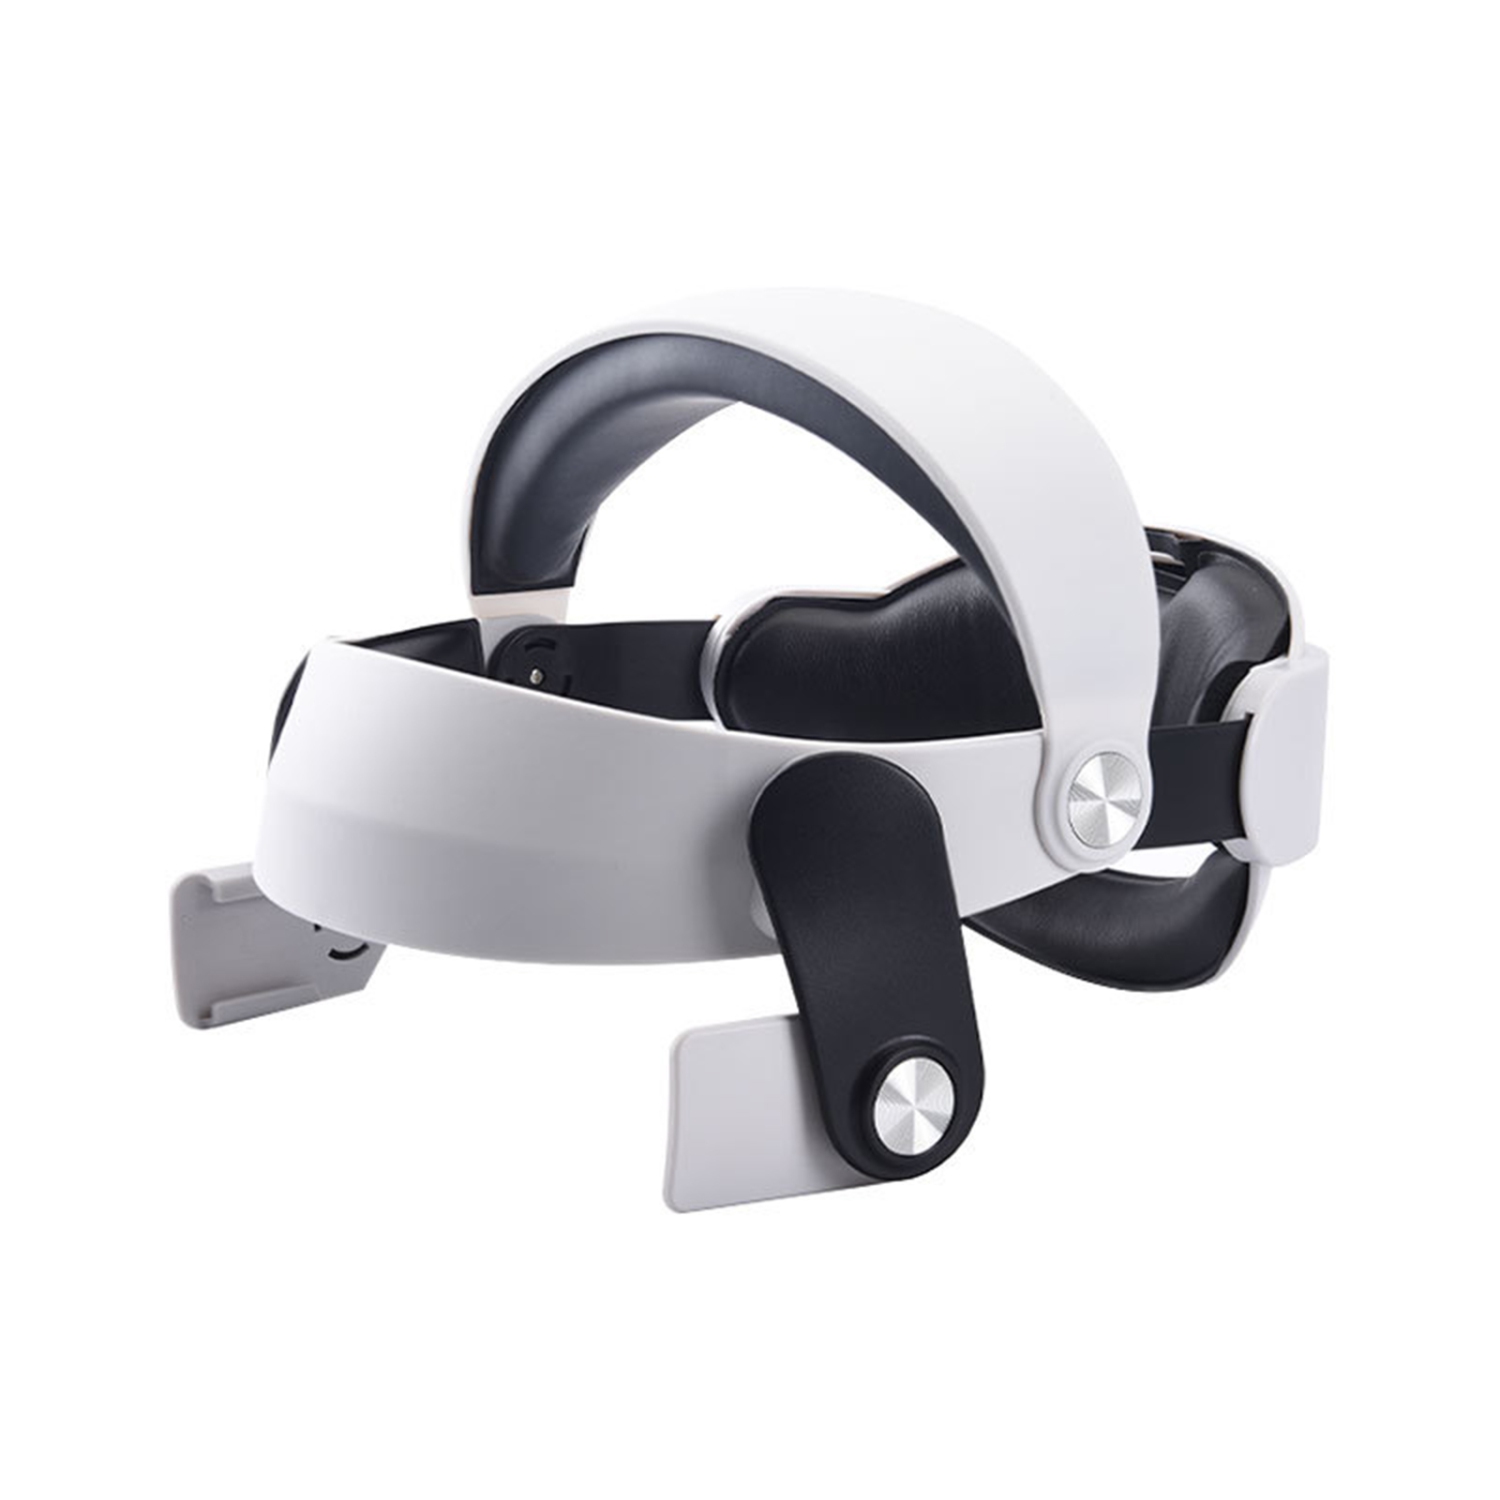 NEWENMO Adjustable Elite Strap for Oculus/Meta Quest 2 Enhanced Support and Comfort,Upgraded for Quest 2 Head Strap Reduce H